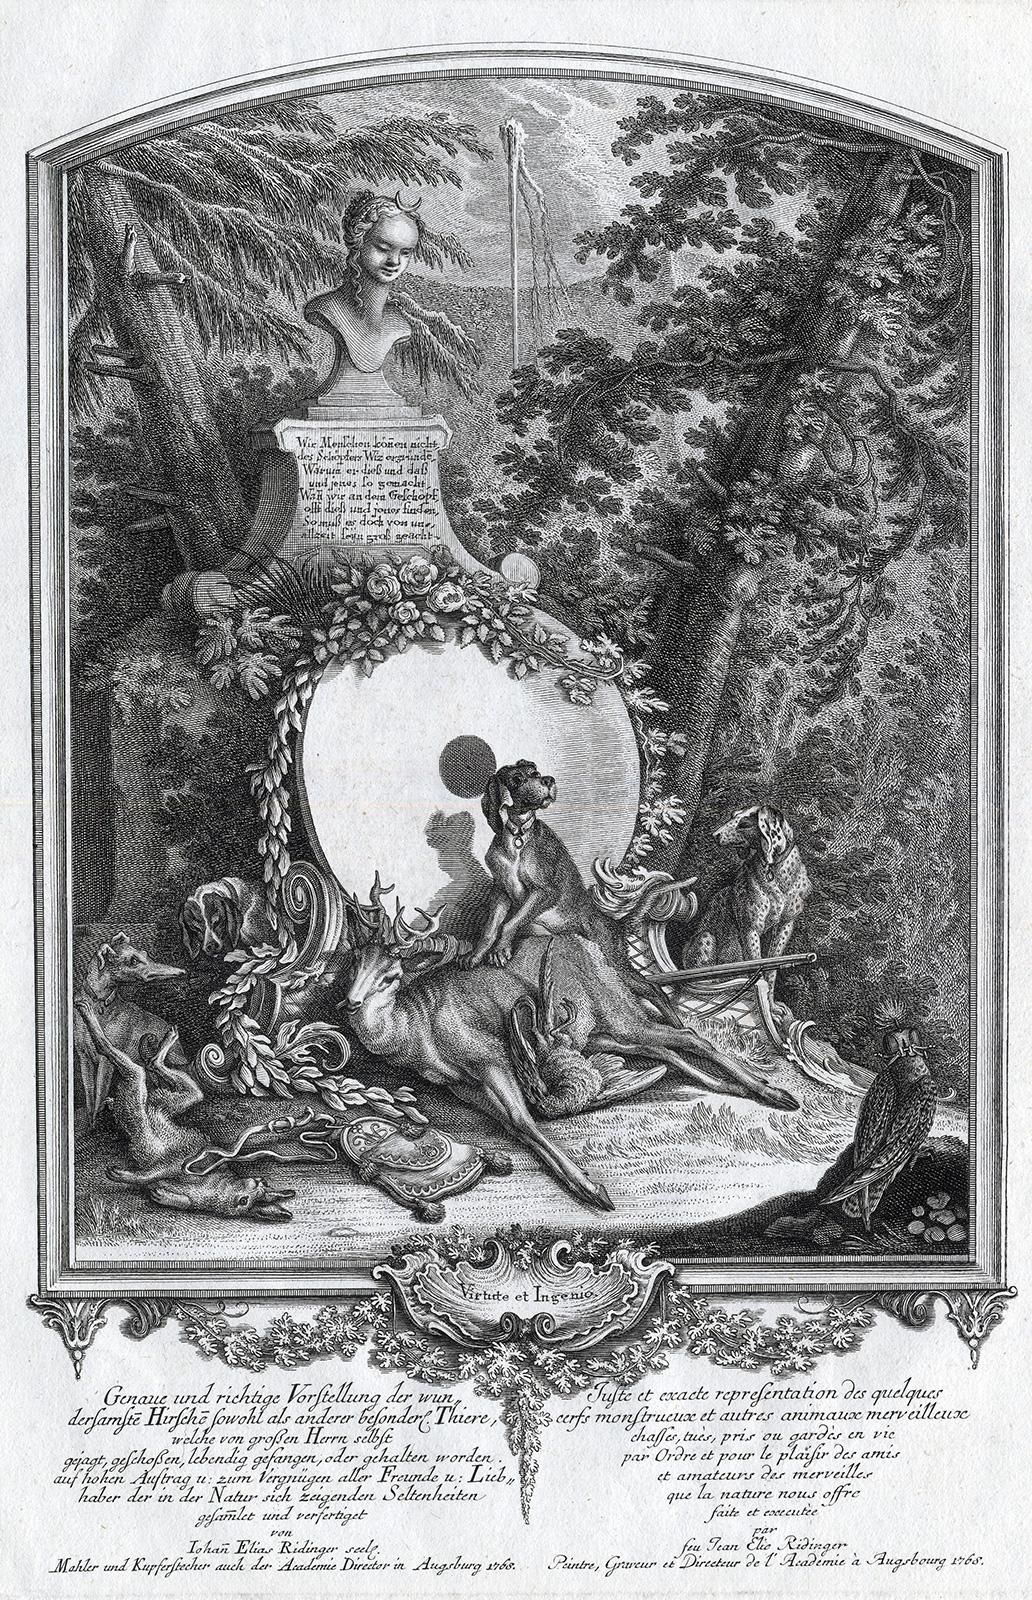 Martin Elias Ridinger Landscape Print - Antique print showing Selene and a hunting dog by Ridinger - Engraving - 18th c